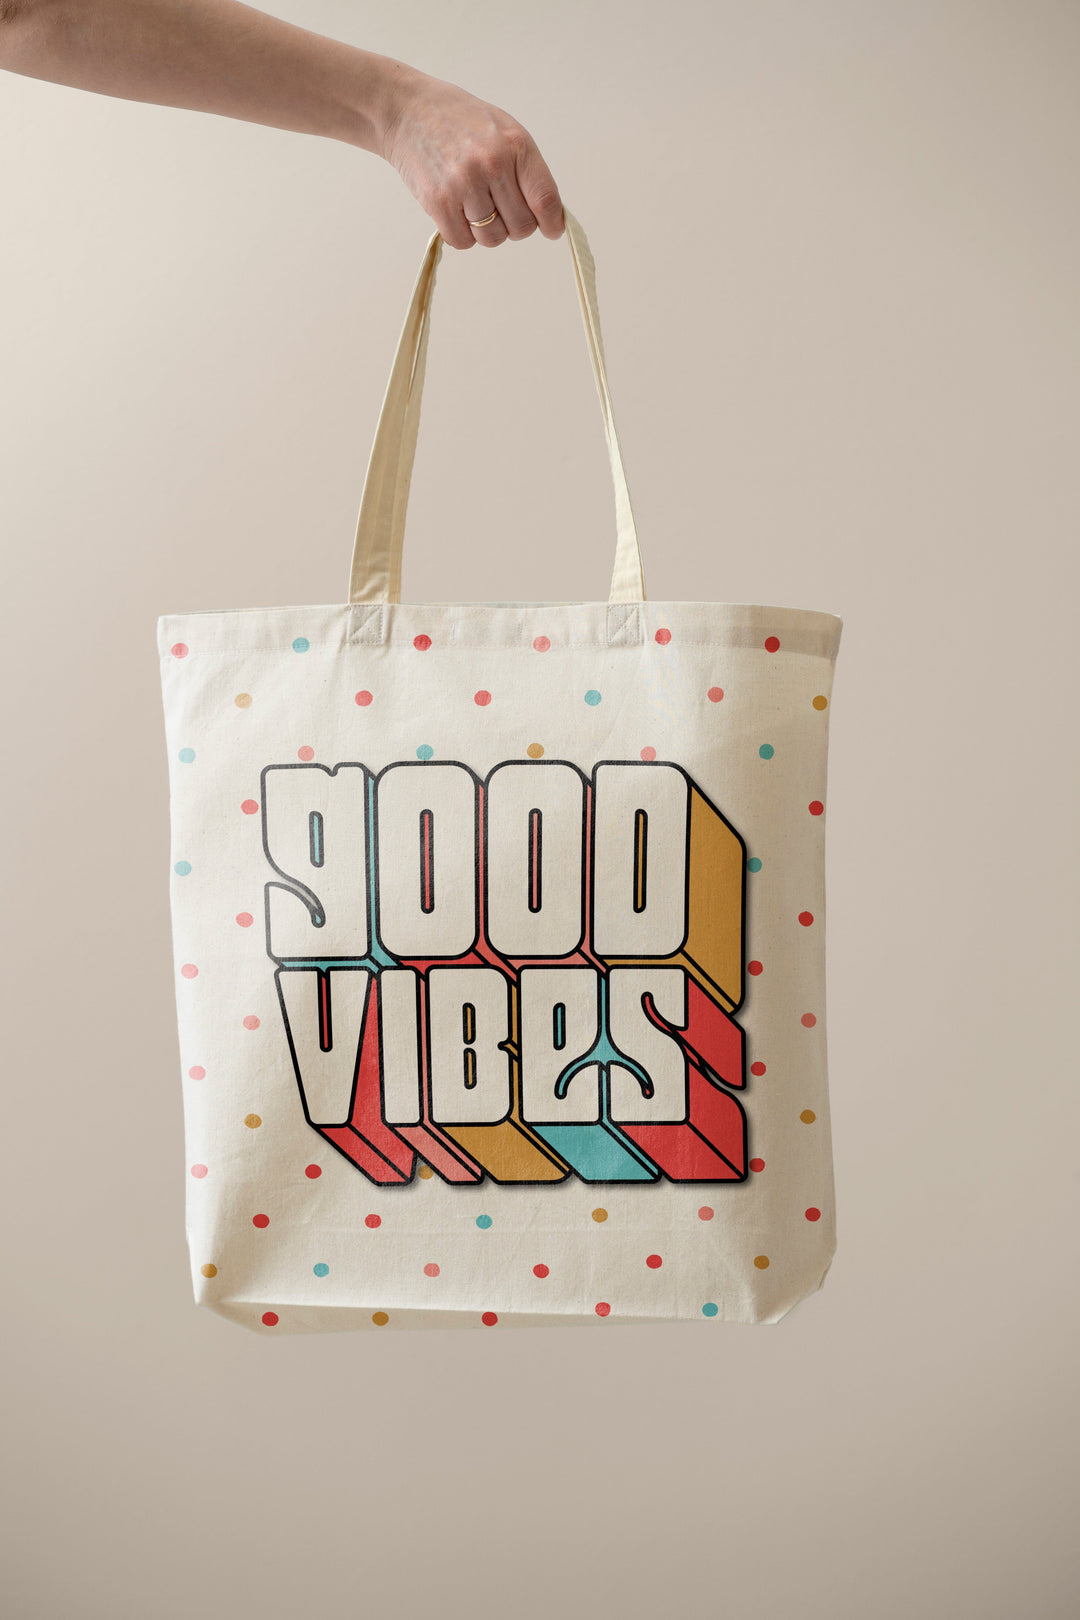 Good Vibes - Tote Bag Lunch Boxes & Totes CandyFlossstores 